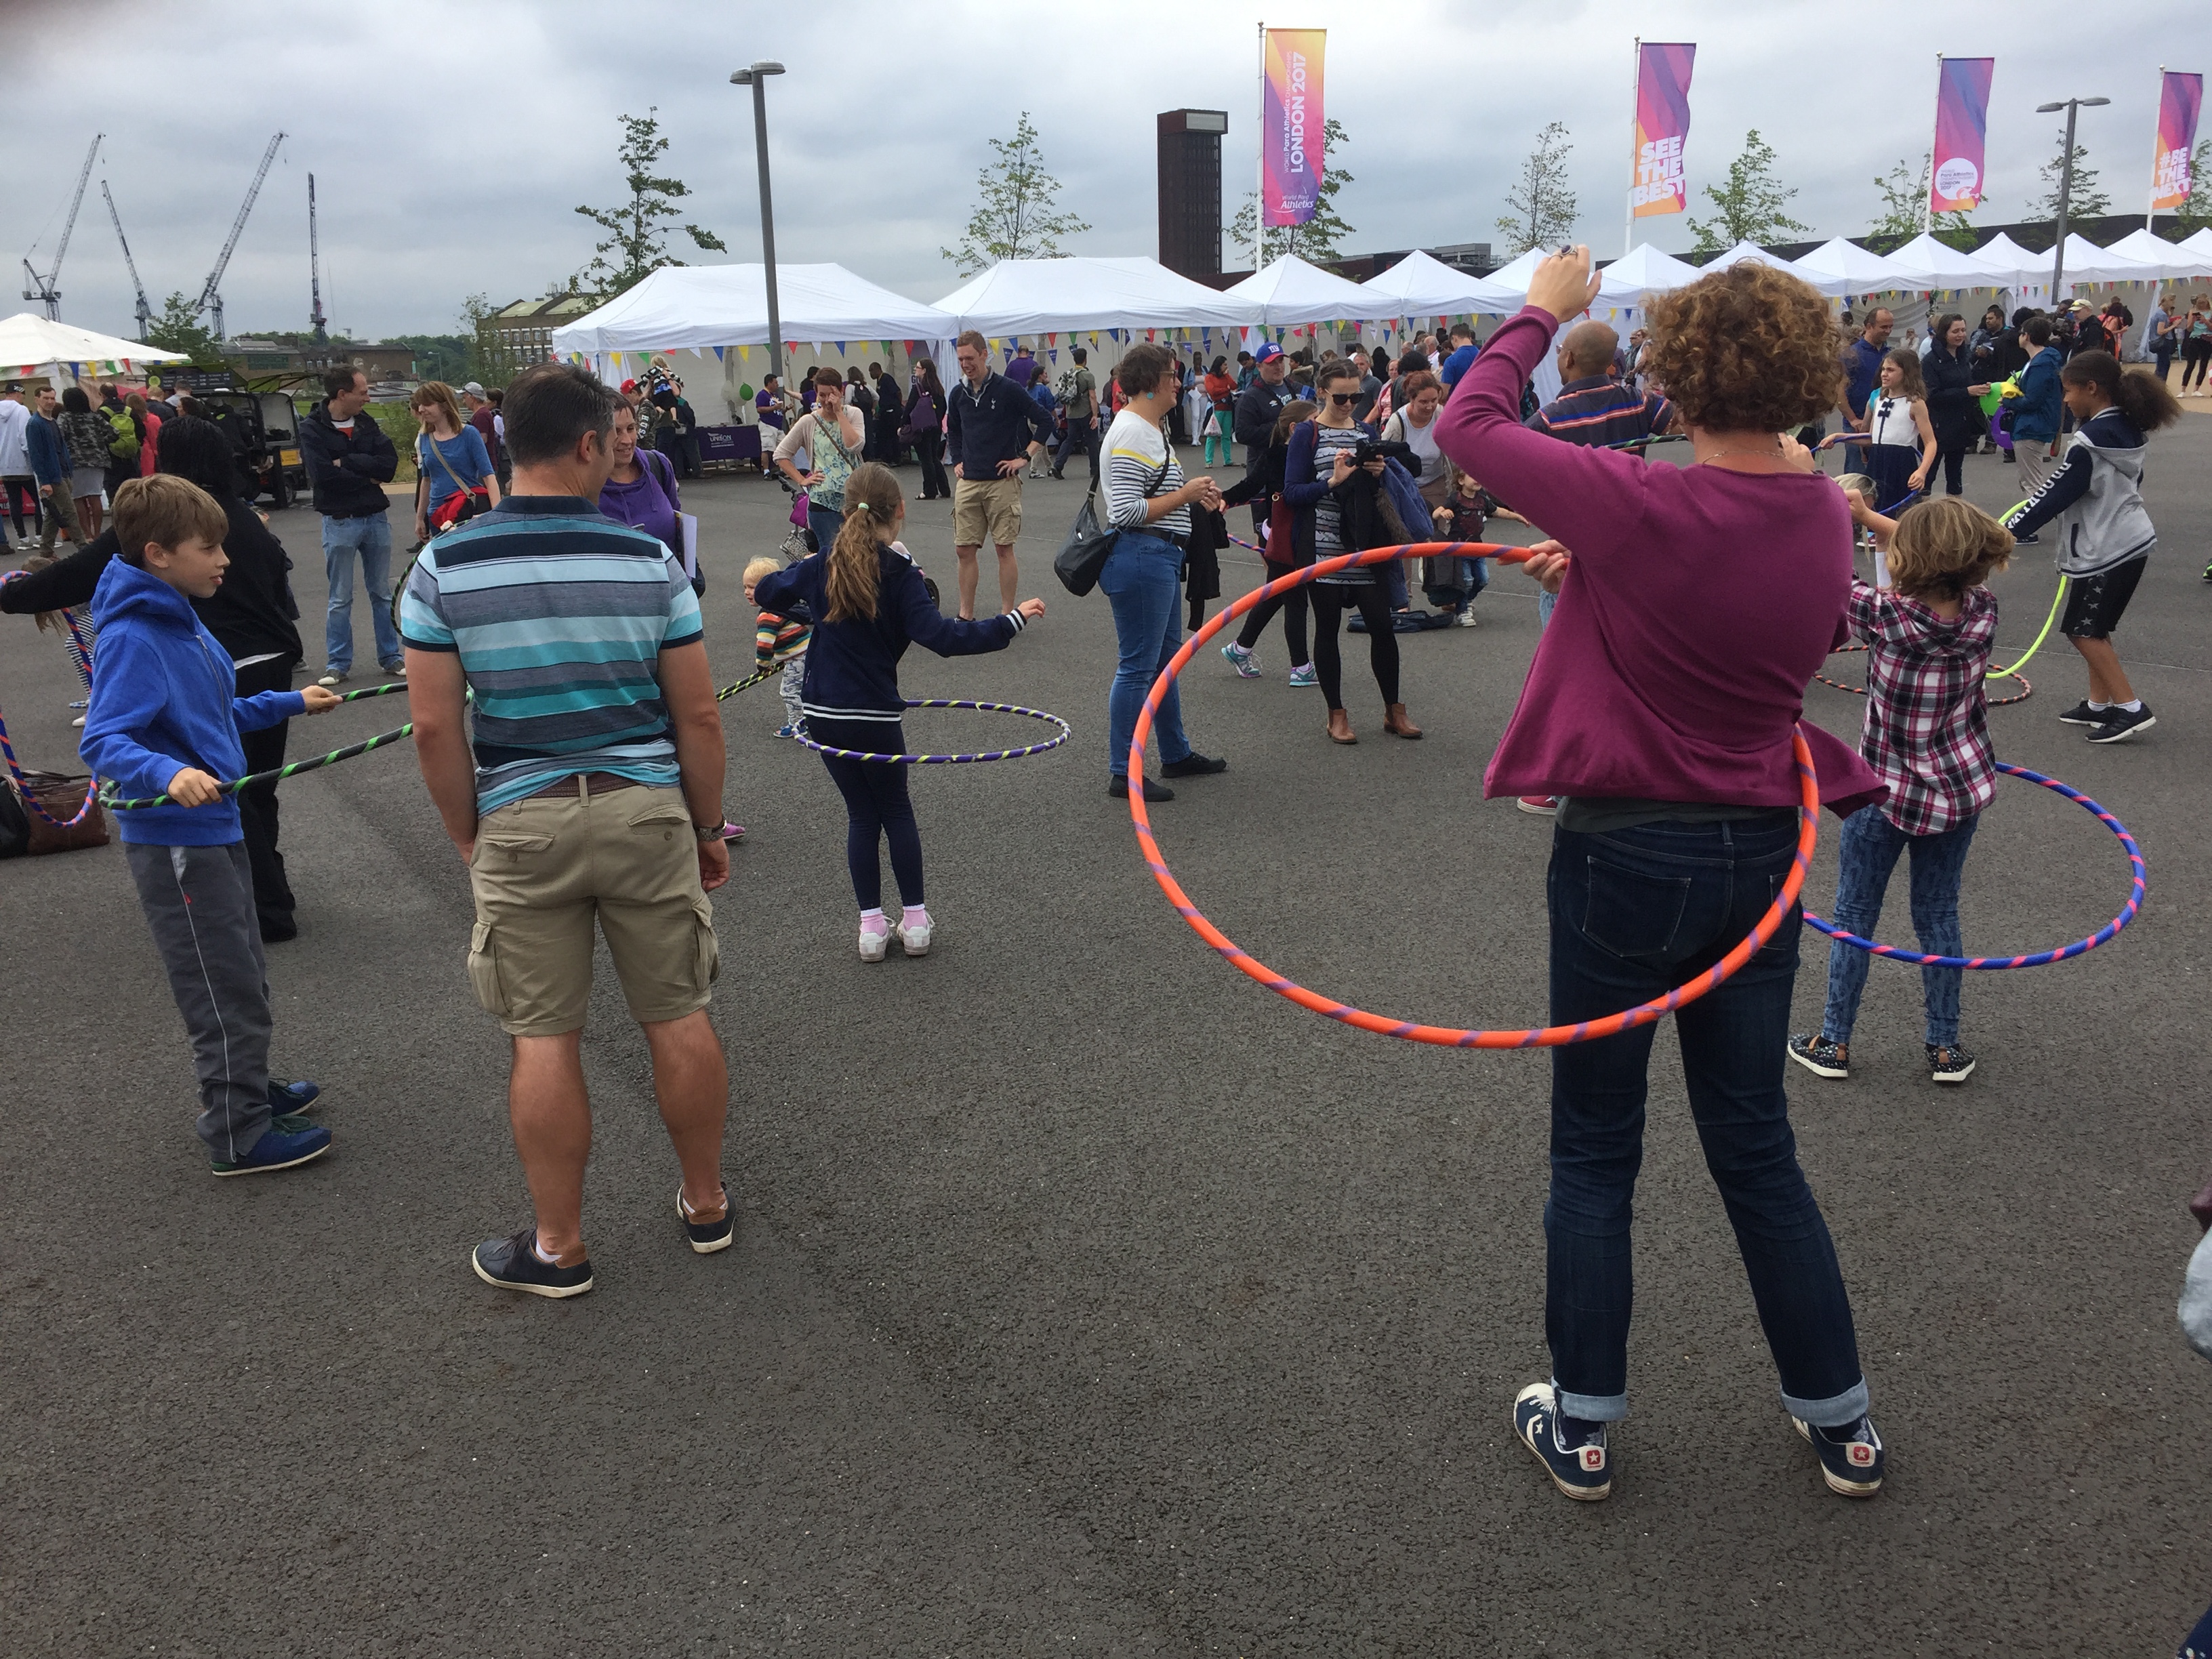 A group of people hula hooping together in the Olympic Park.